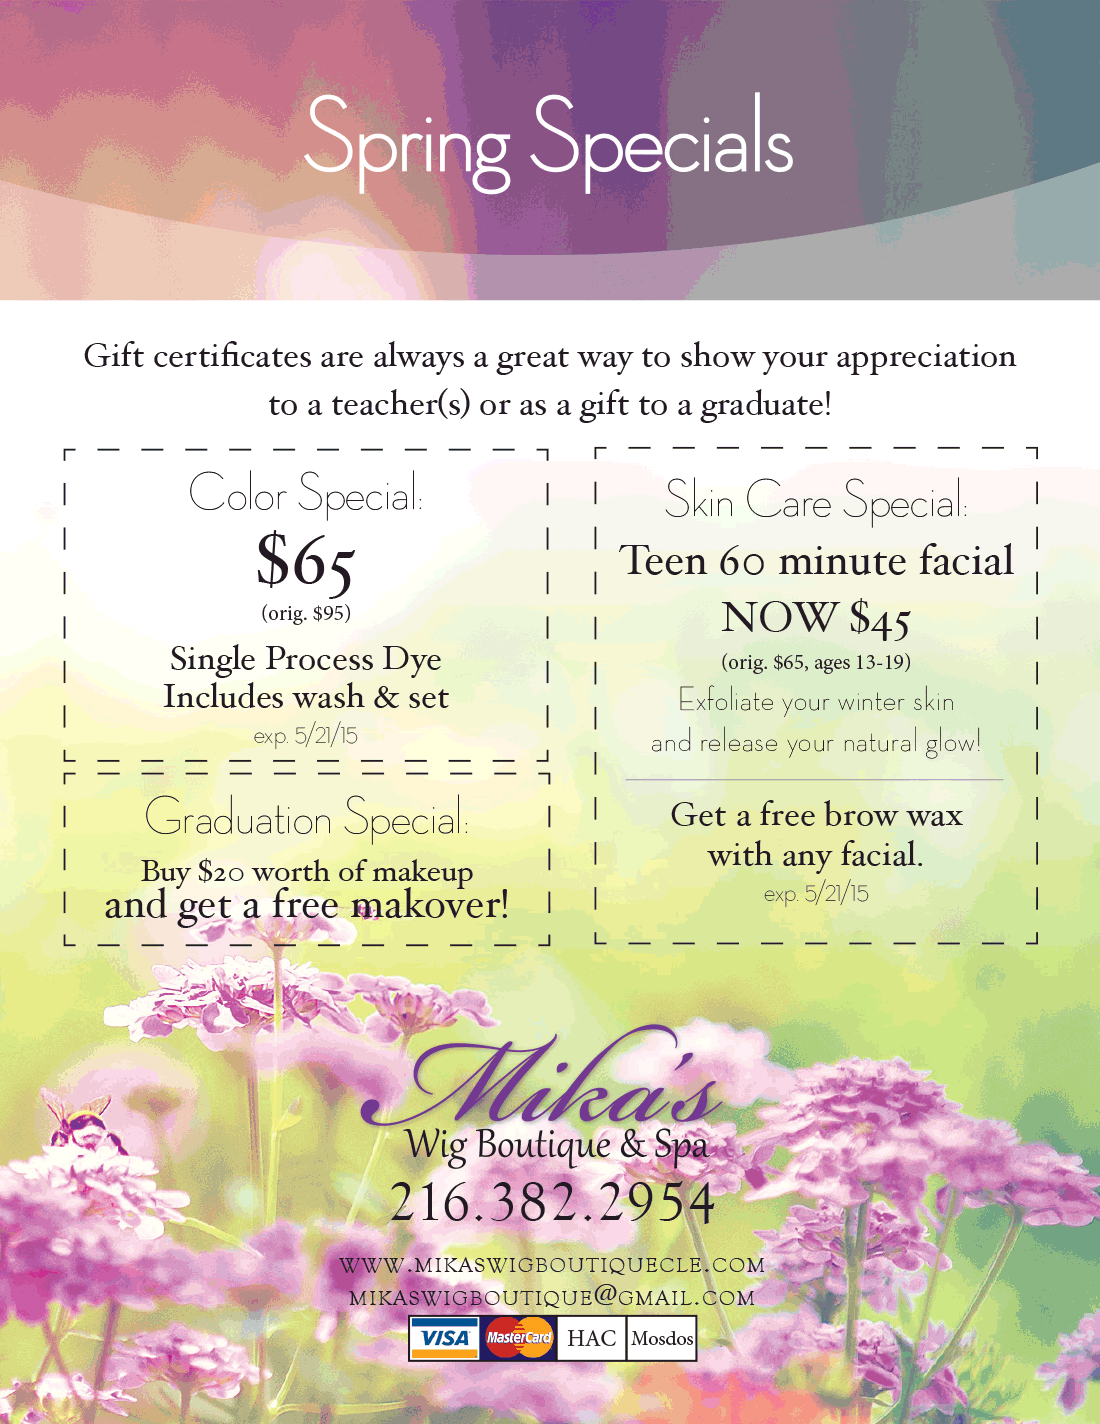 Mika’s Wig Boutique and Spa Spring Specials